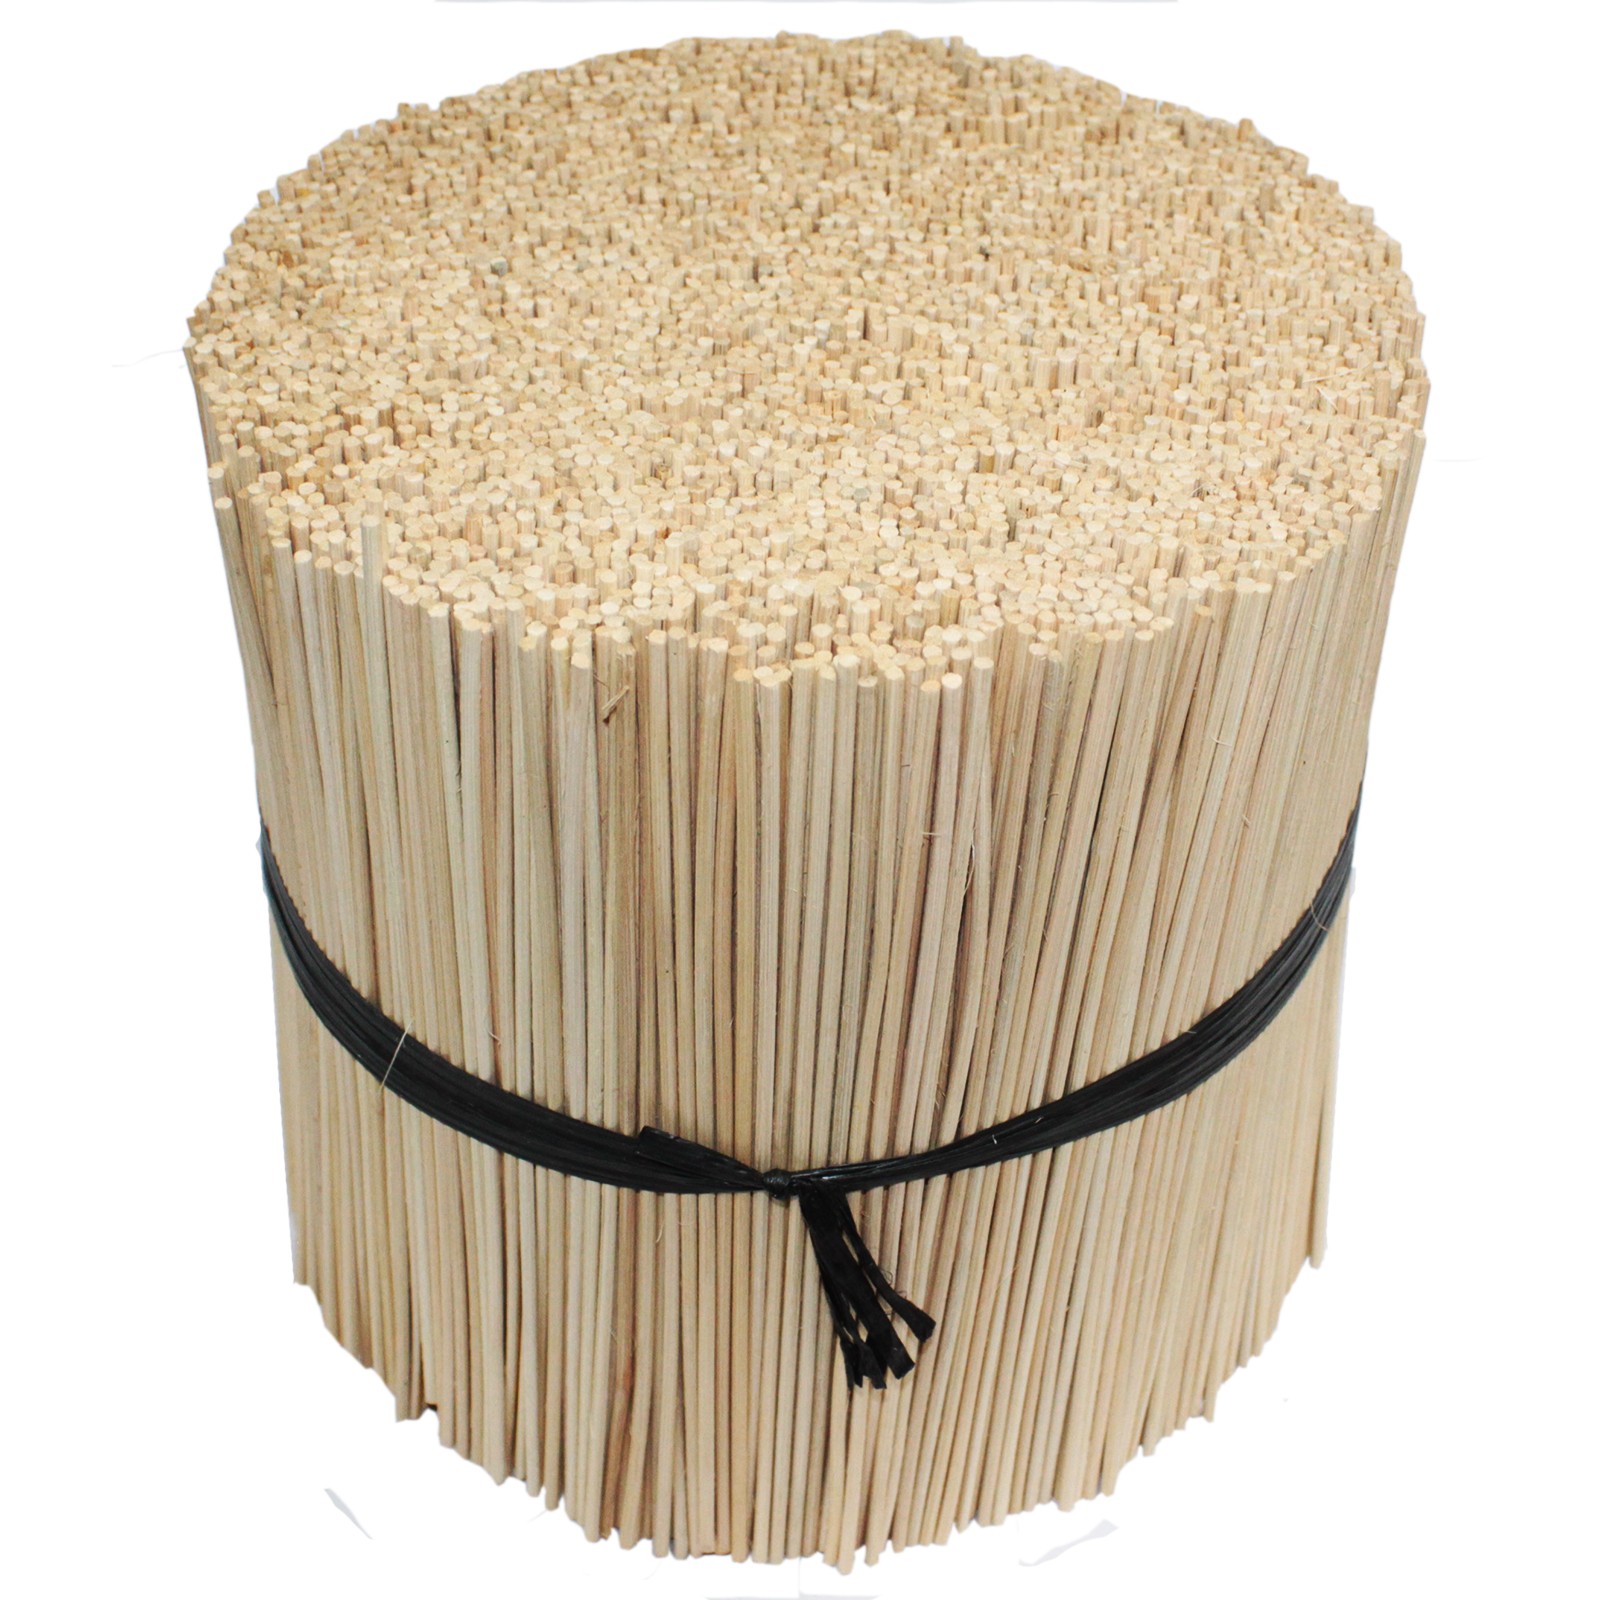 5kg of 2.5mm Reed Diffuser Sticks - Approx 5000 Reeds